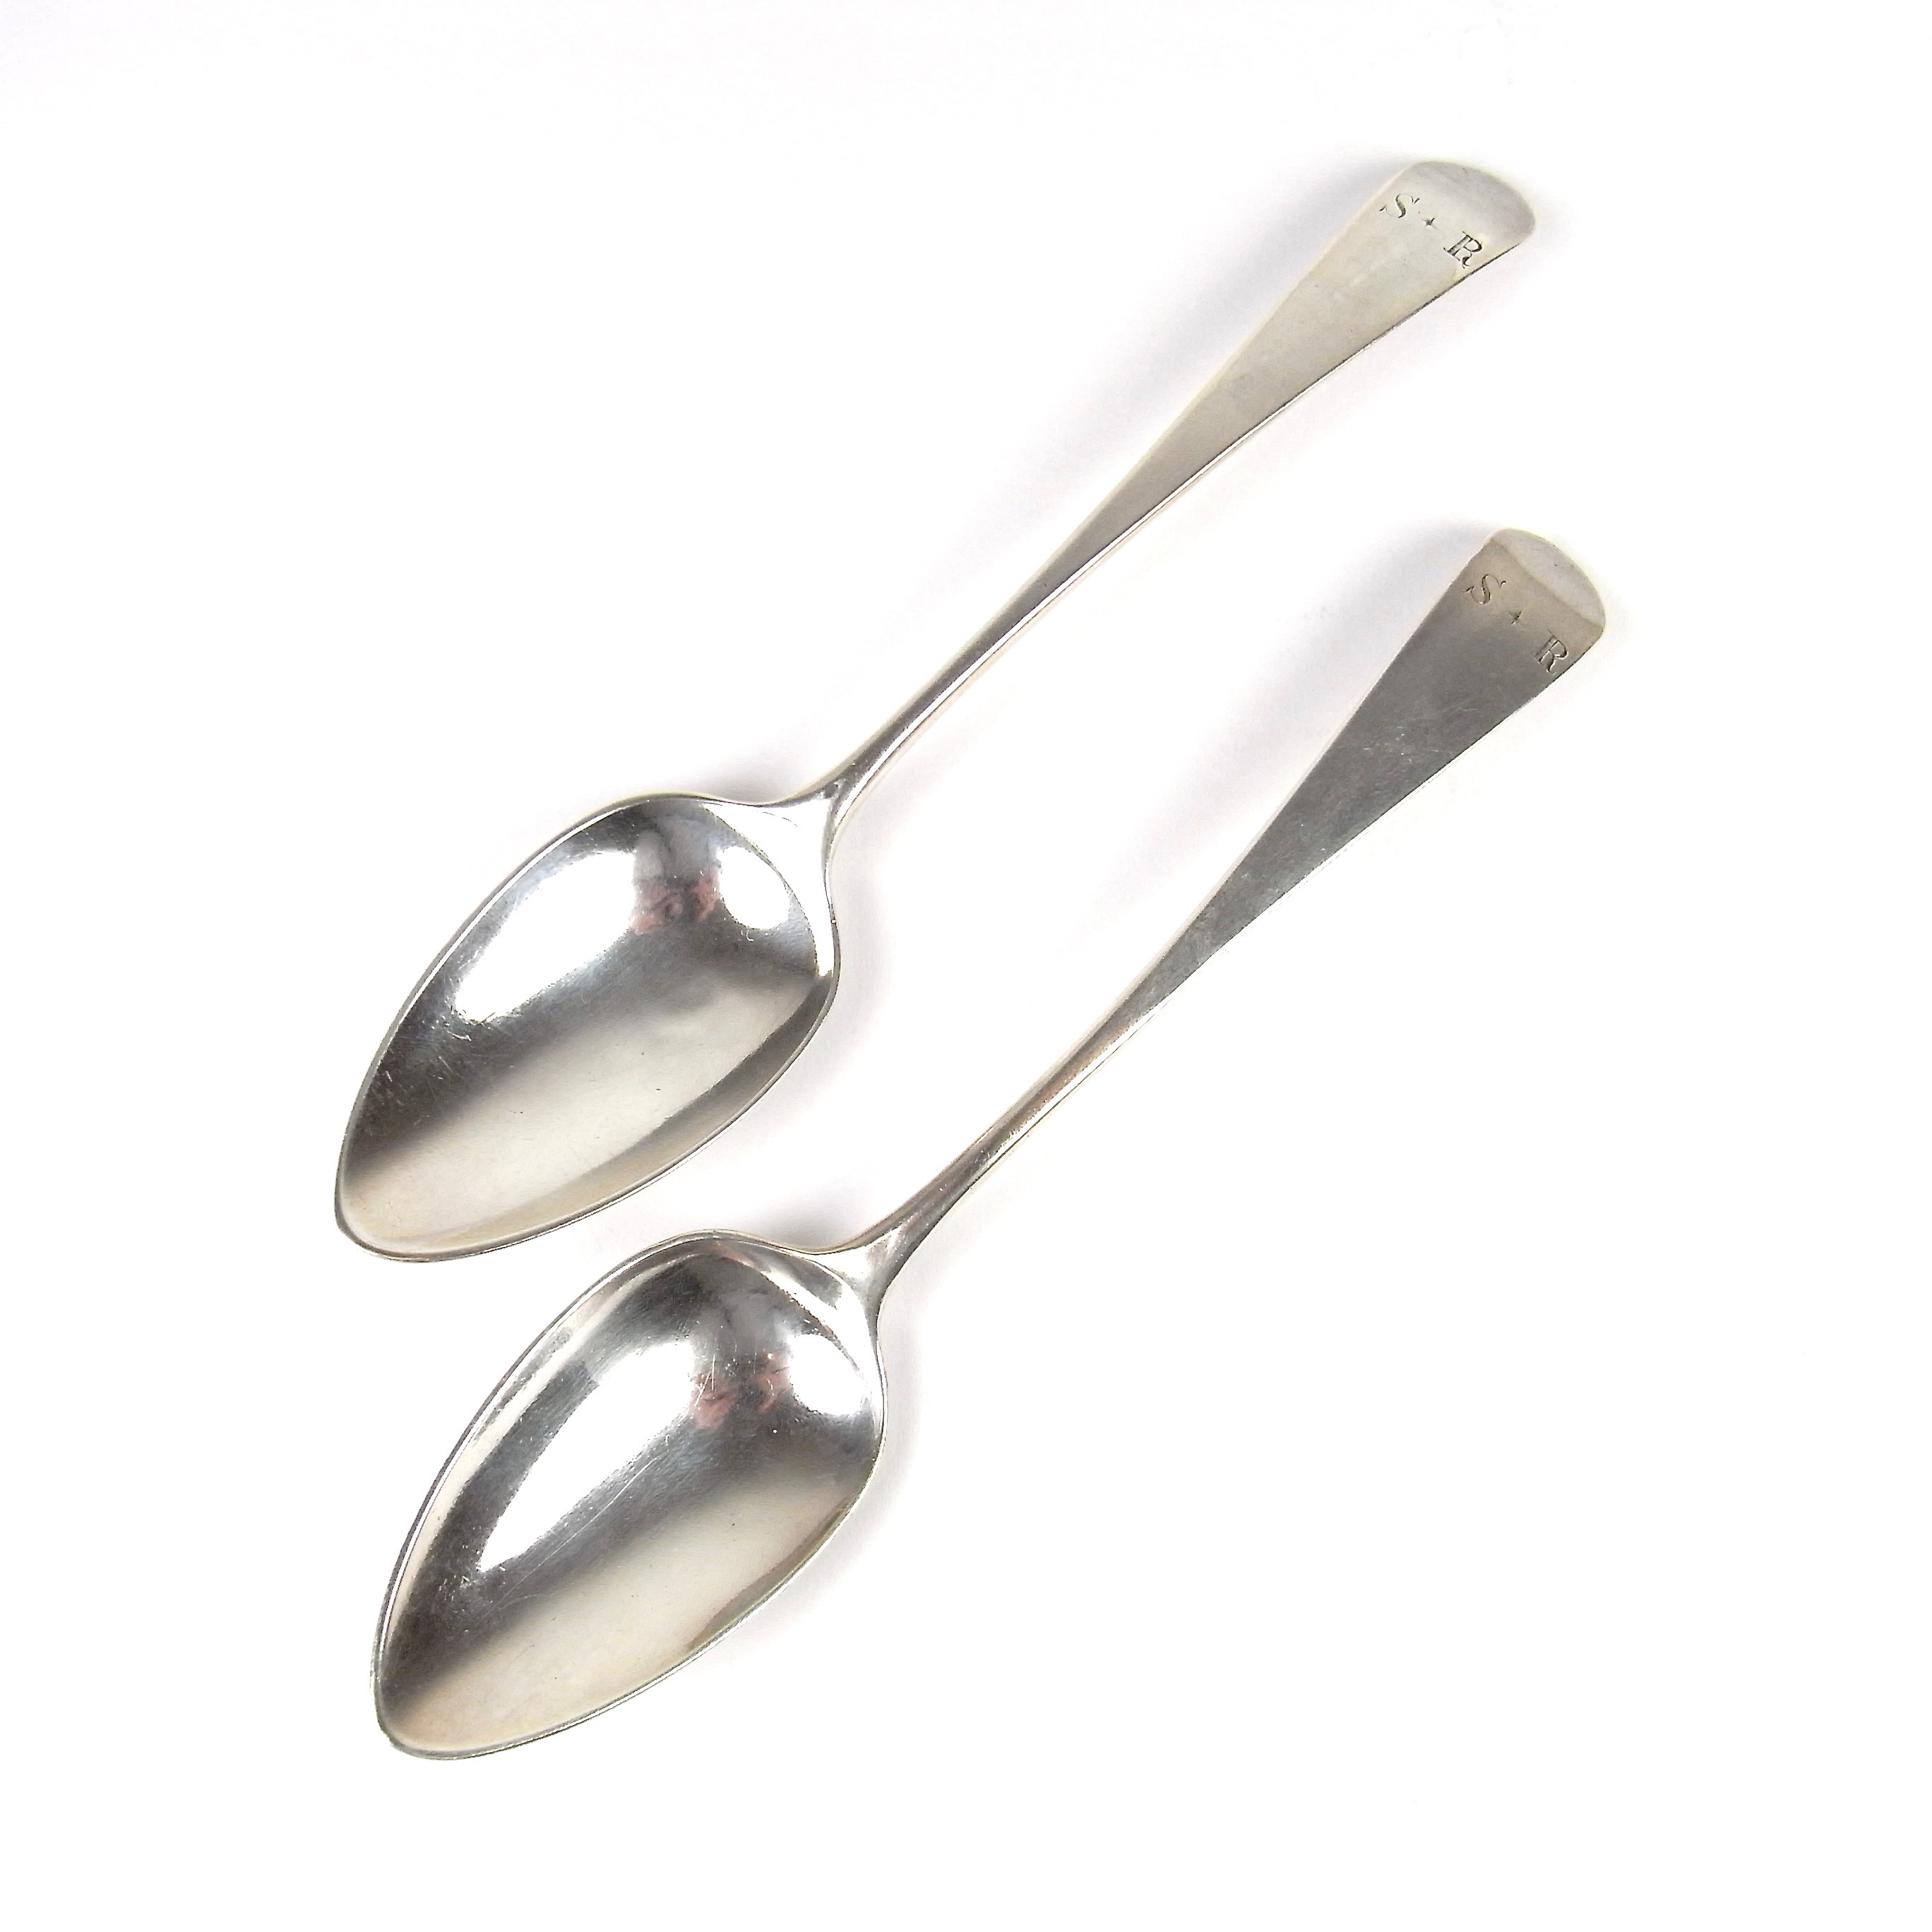 A pair of George III silver tablespoons, late 18th century